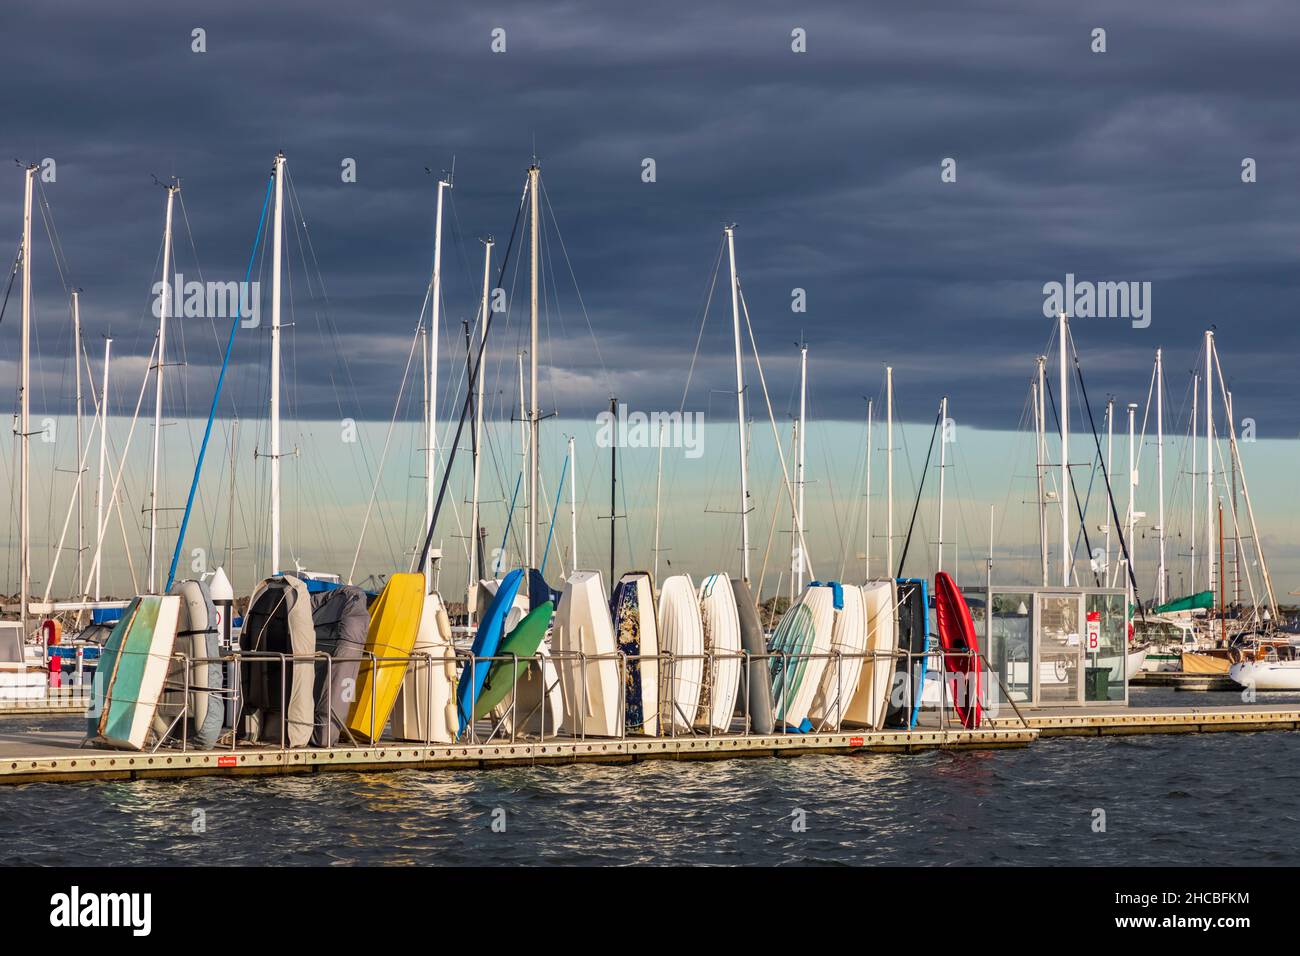 Australia, Victoria, Melbourne, Cloudy sky over yachts floating against city skyline Stock Photo